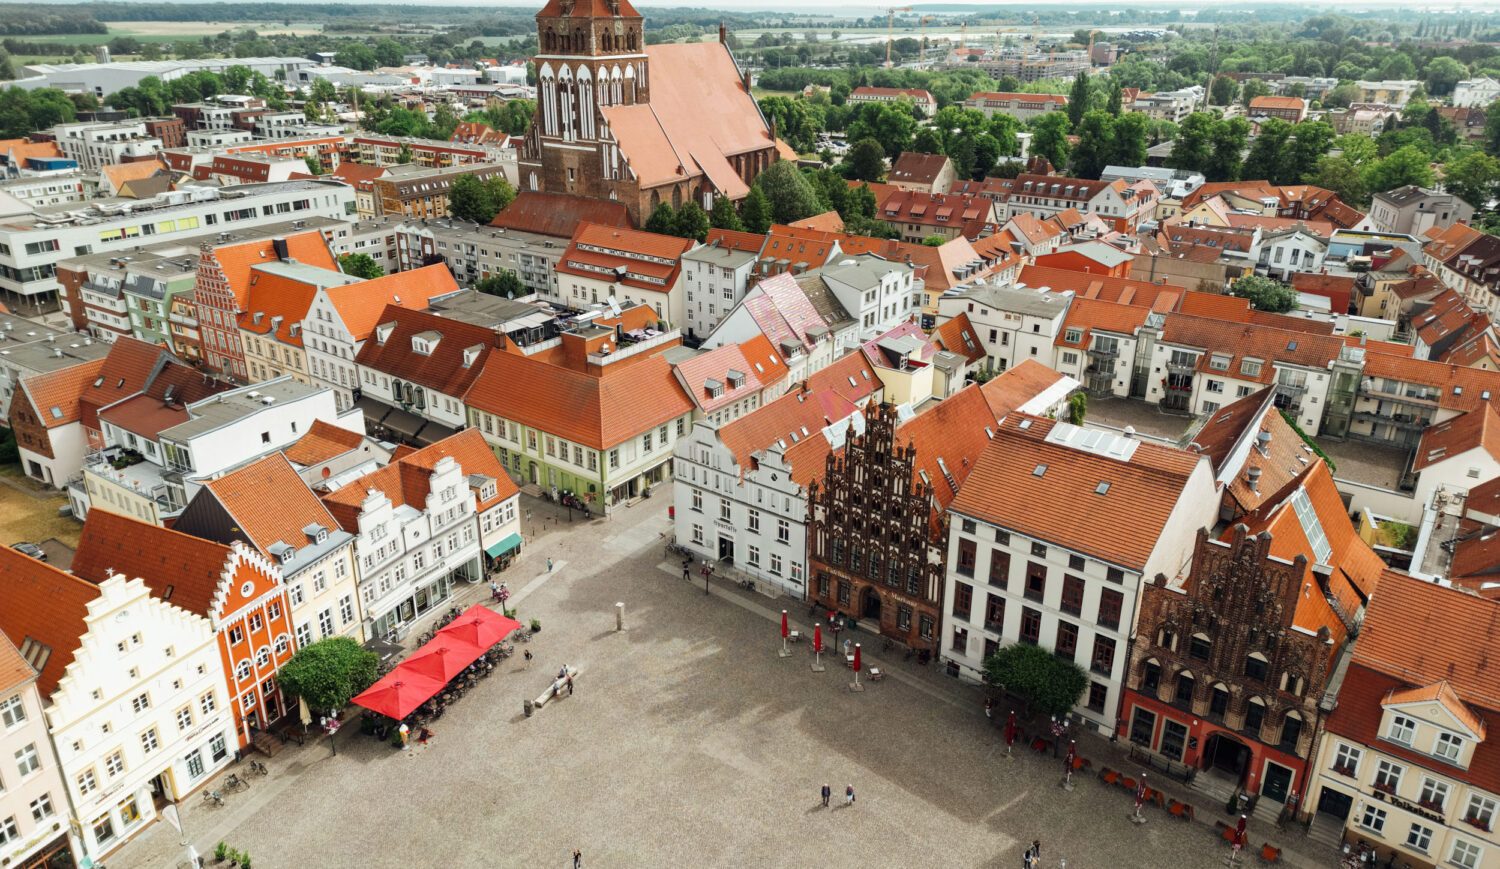 The big birthday party will be held on Greifswald's market square in September © TMV/Petermann